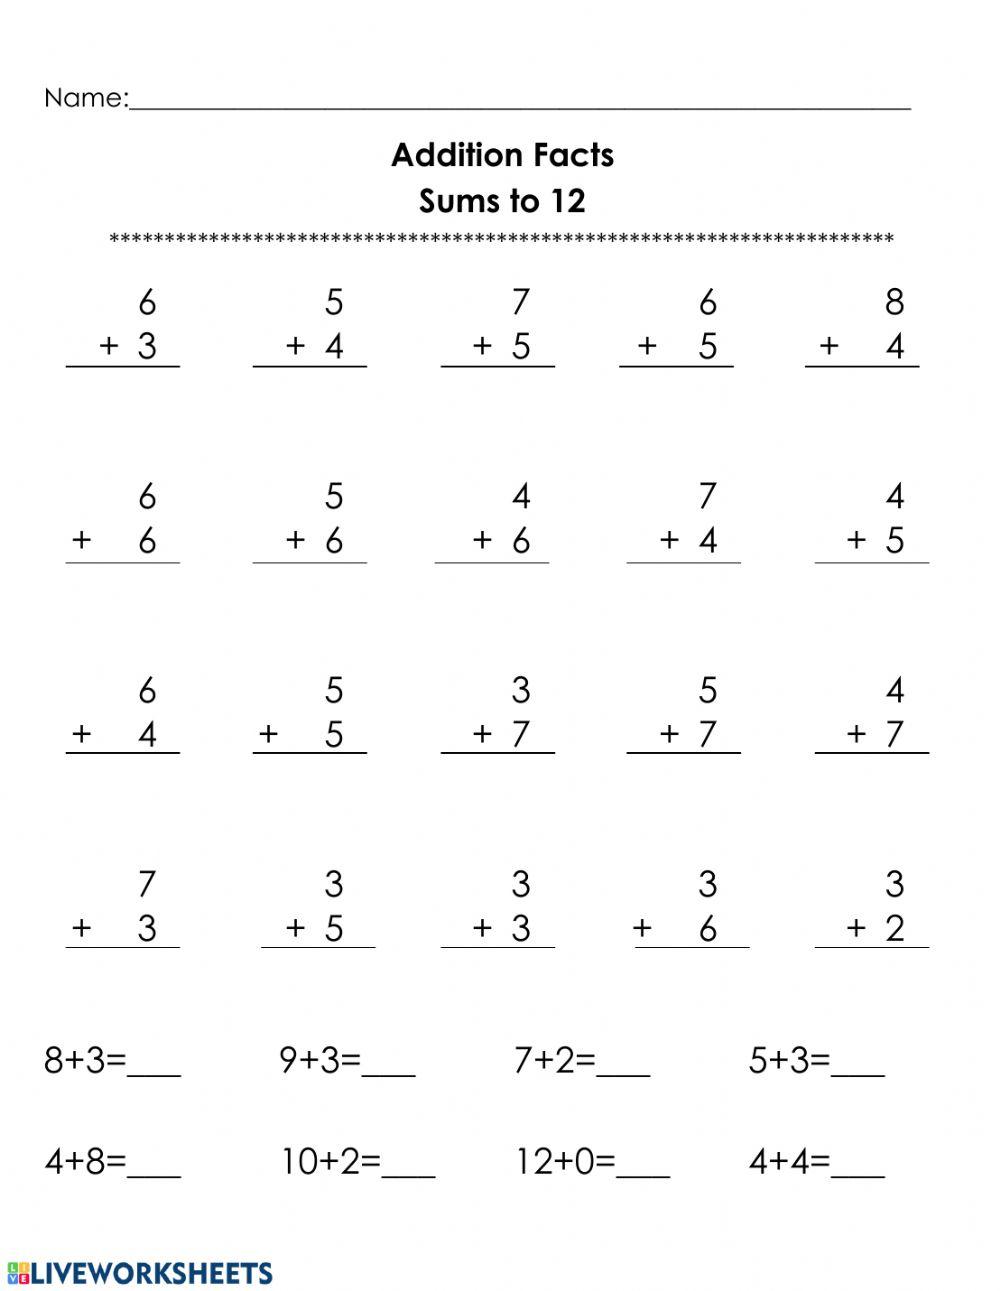 Addition Sums to 12